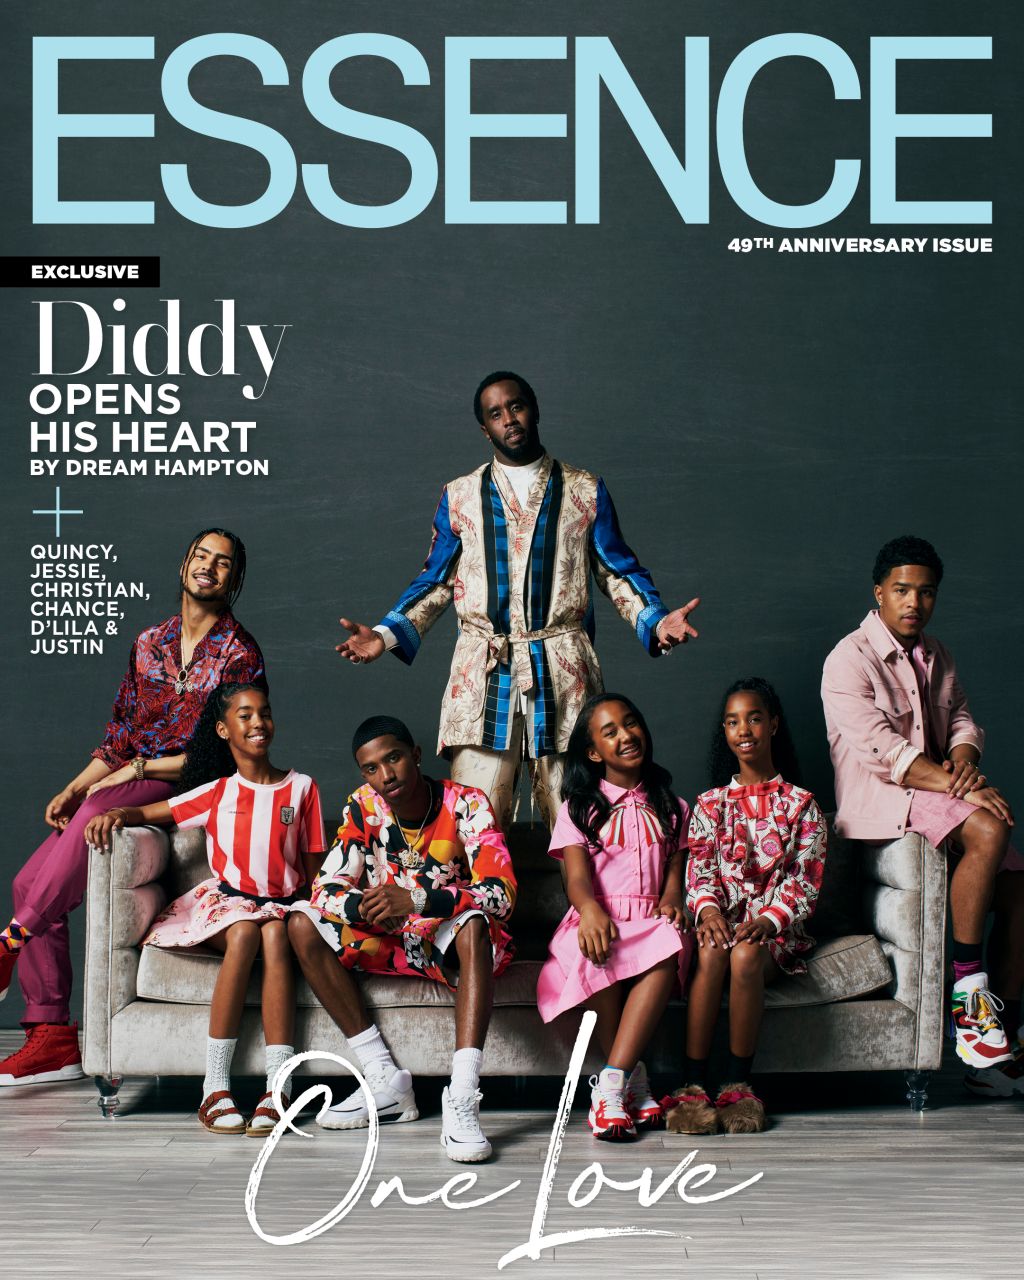 Diddy Essence Cover